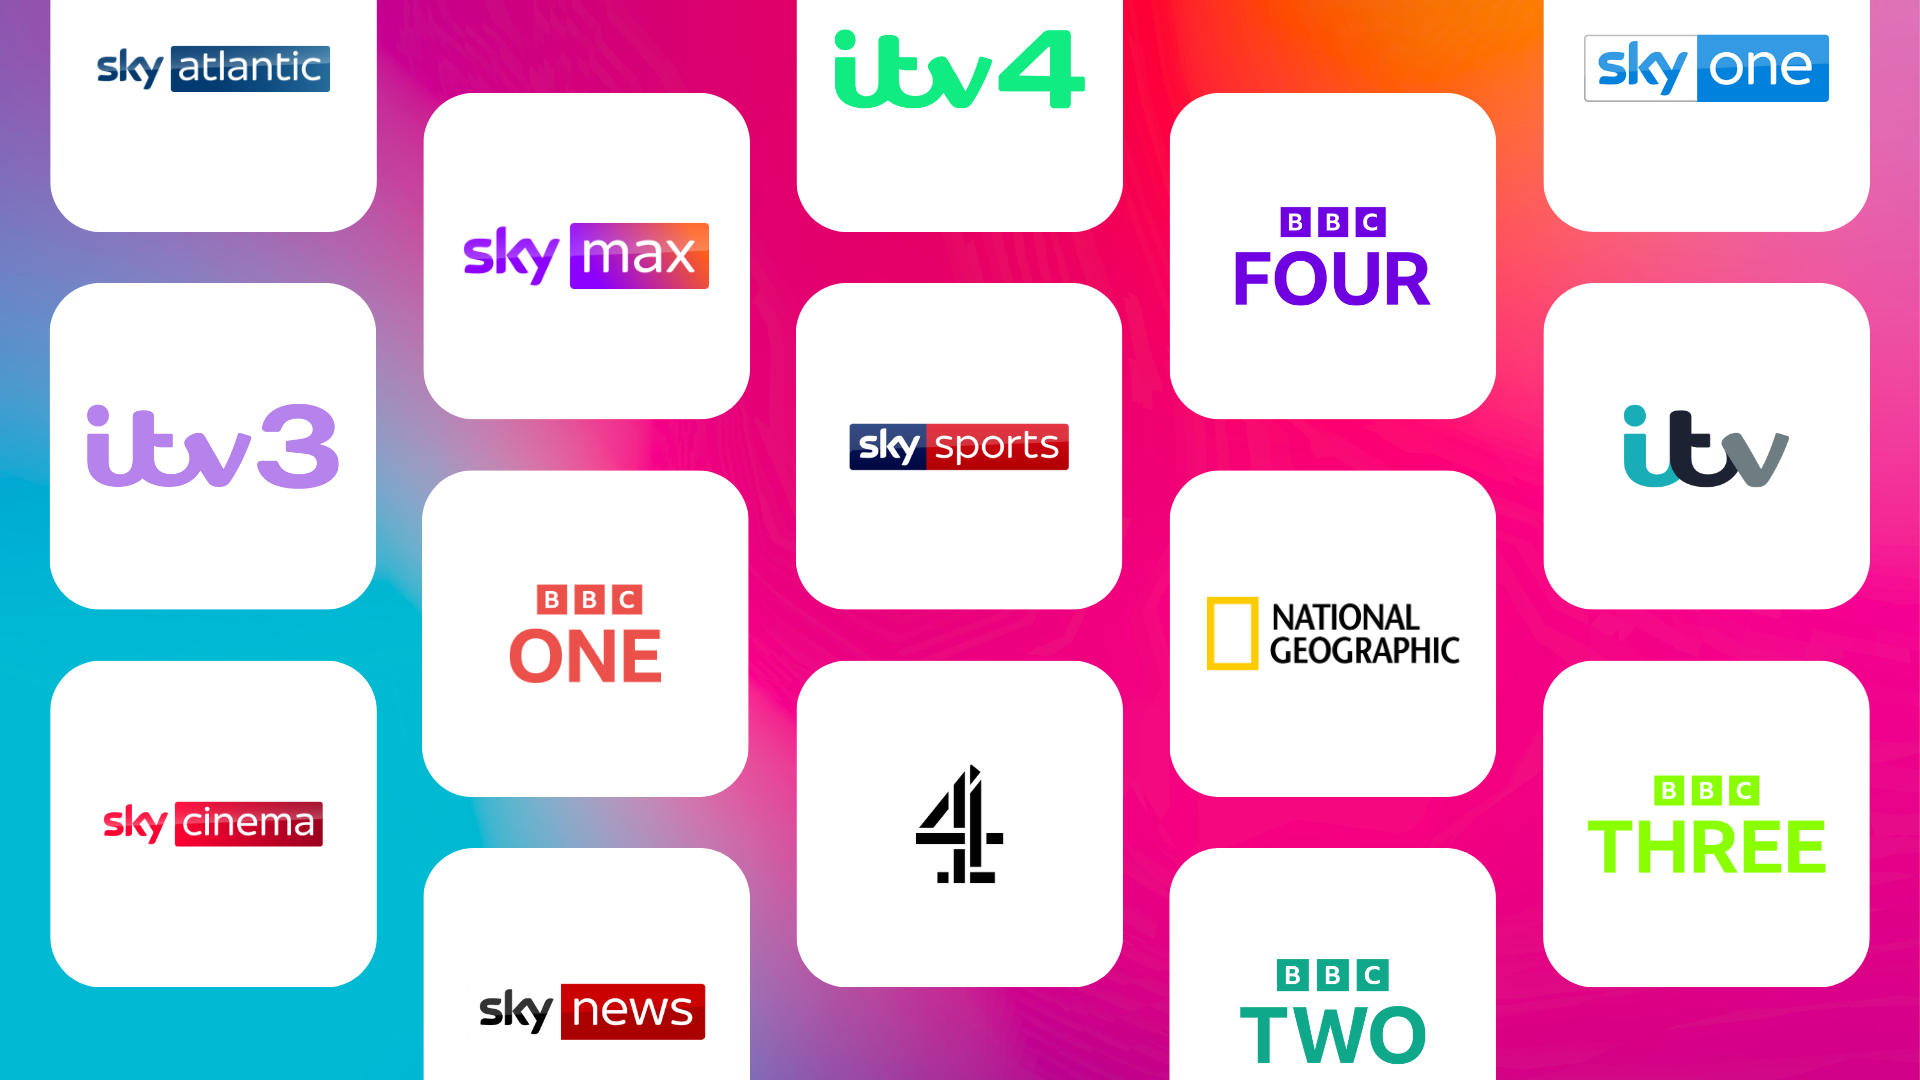 The logos of some of the channels available through Sky packs